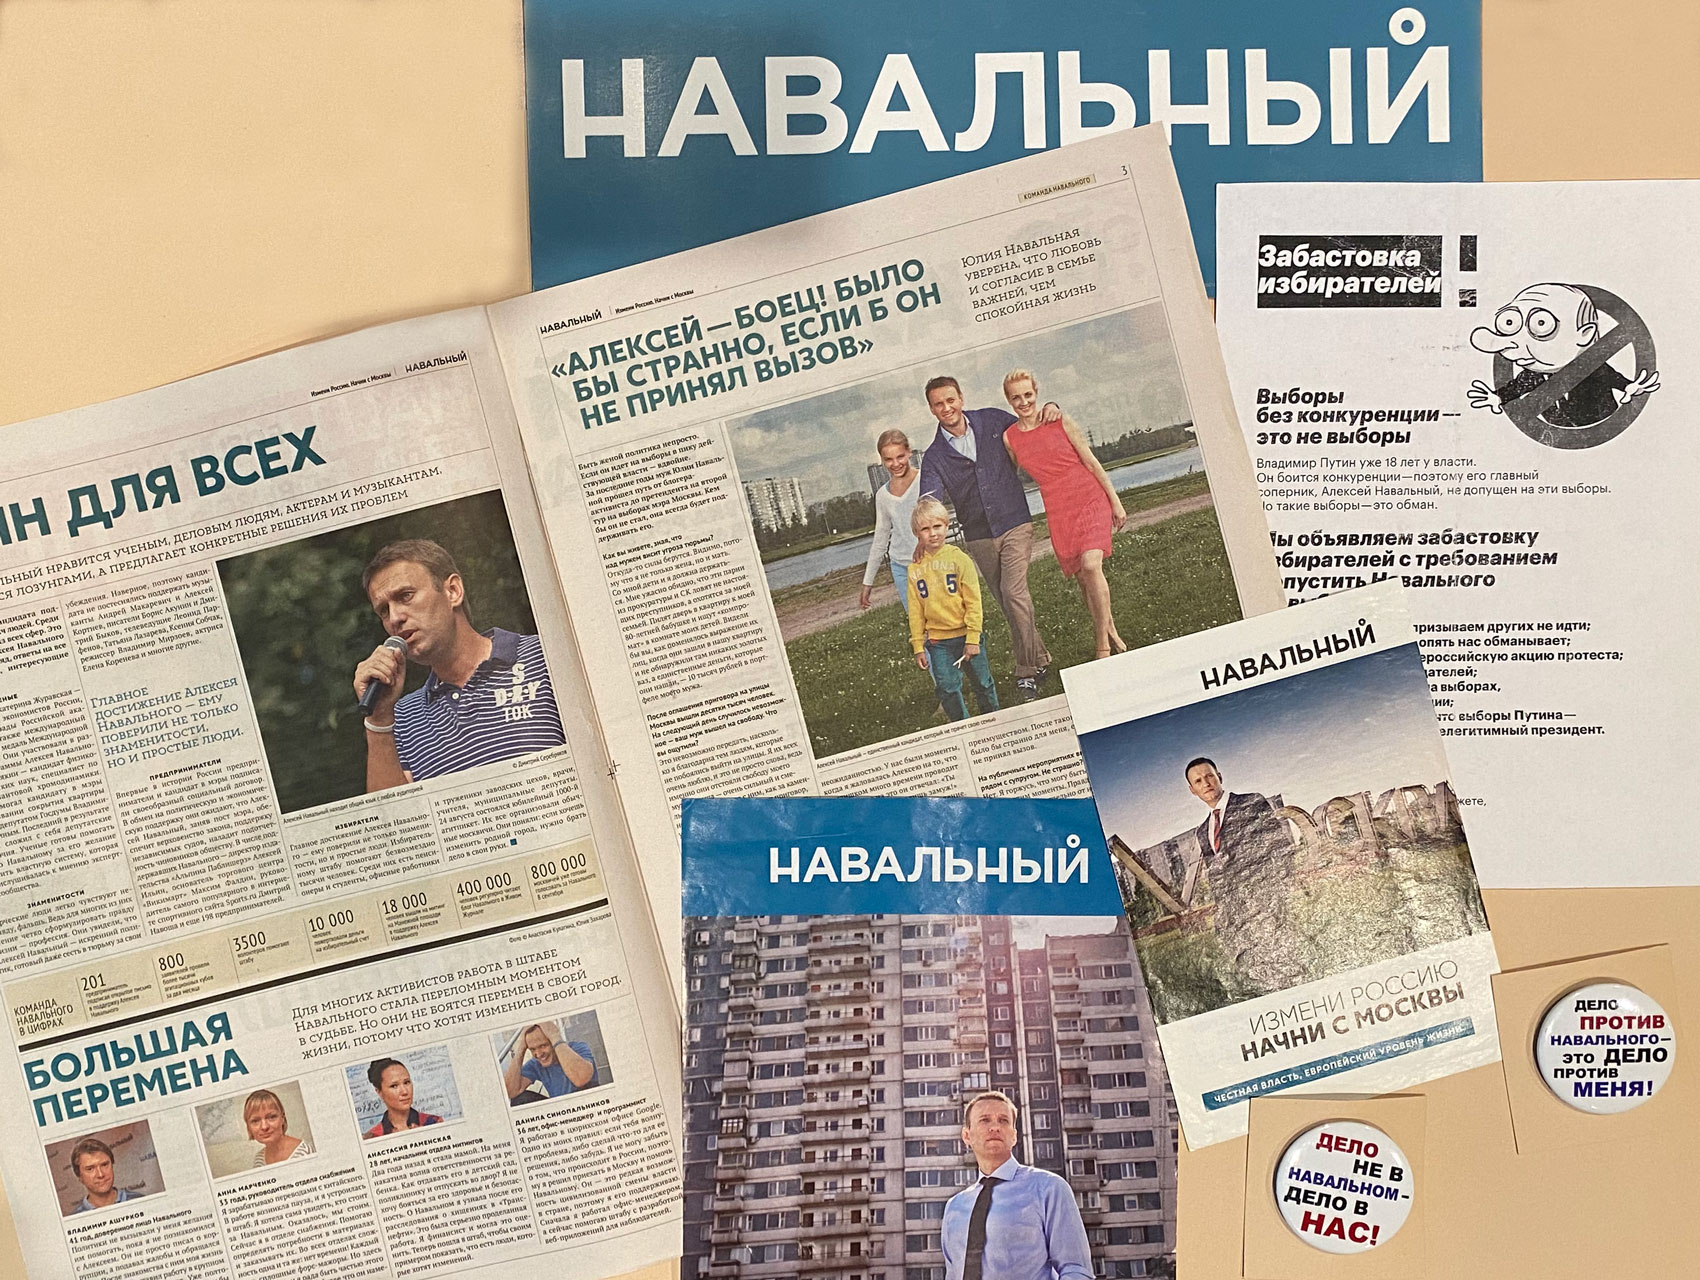 Navalny campaign material